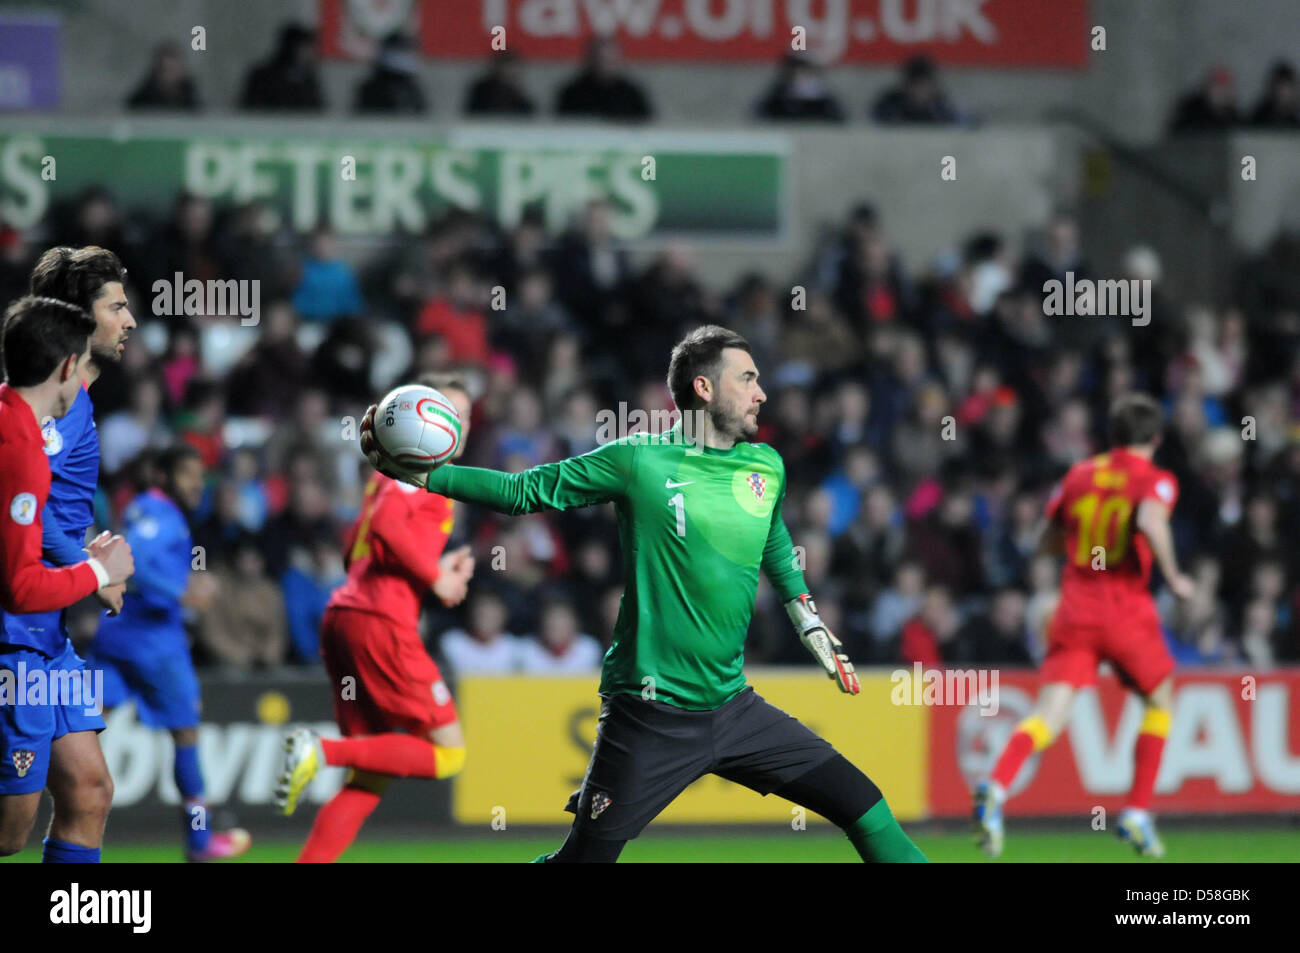 Swansea, UK. 26th March 2013. FIFA 2014 World Cup Qualifier - Wales v Croatia - Swansea - 26th March 2013 :  Croatia goalkeeper Stipe Pletikosa.Credit: Phil Rees / Alamy Live News Stock Photo